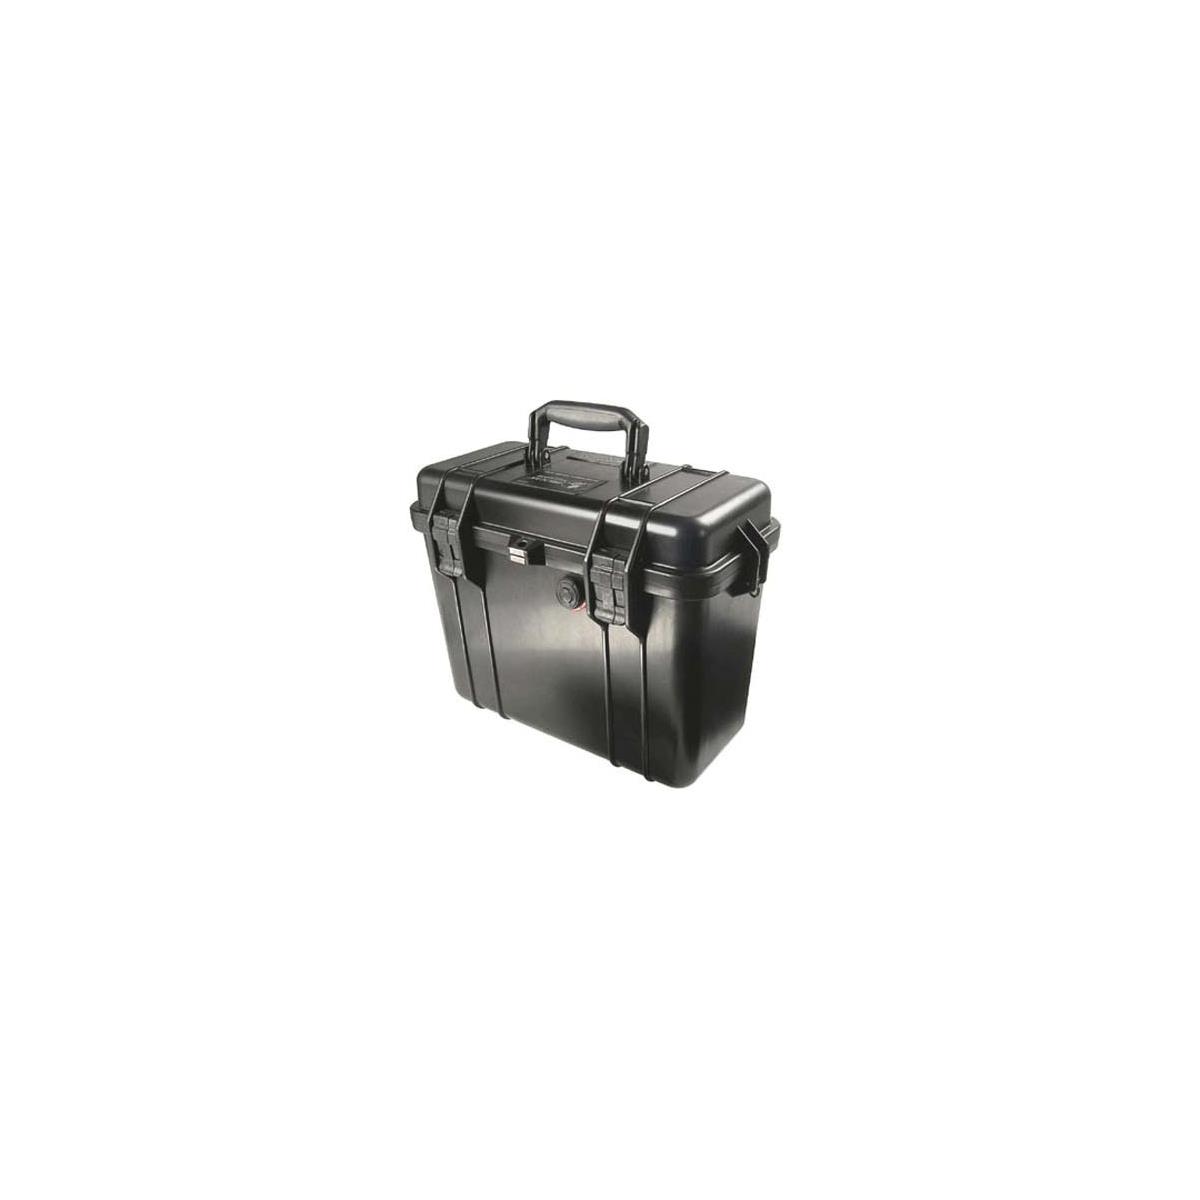 Image of Pelican 1430 Top Loader Watertight Case With Foam Insert